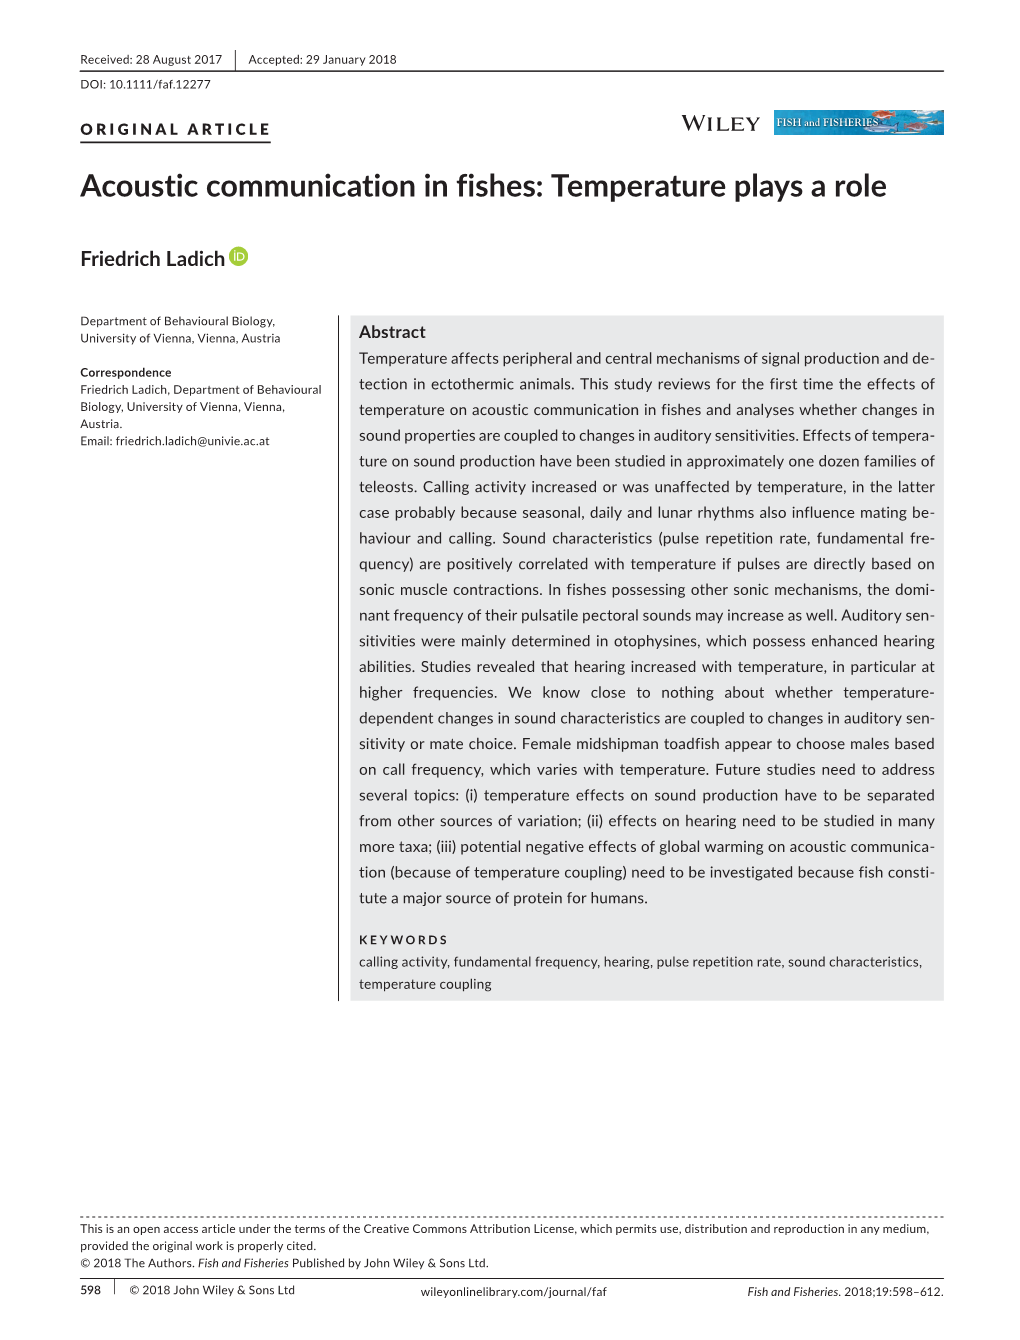 Acoustic Communication in Fishes: Temperature Plays a Role